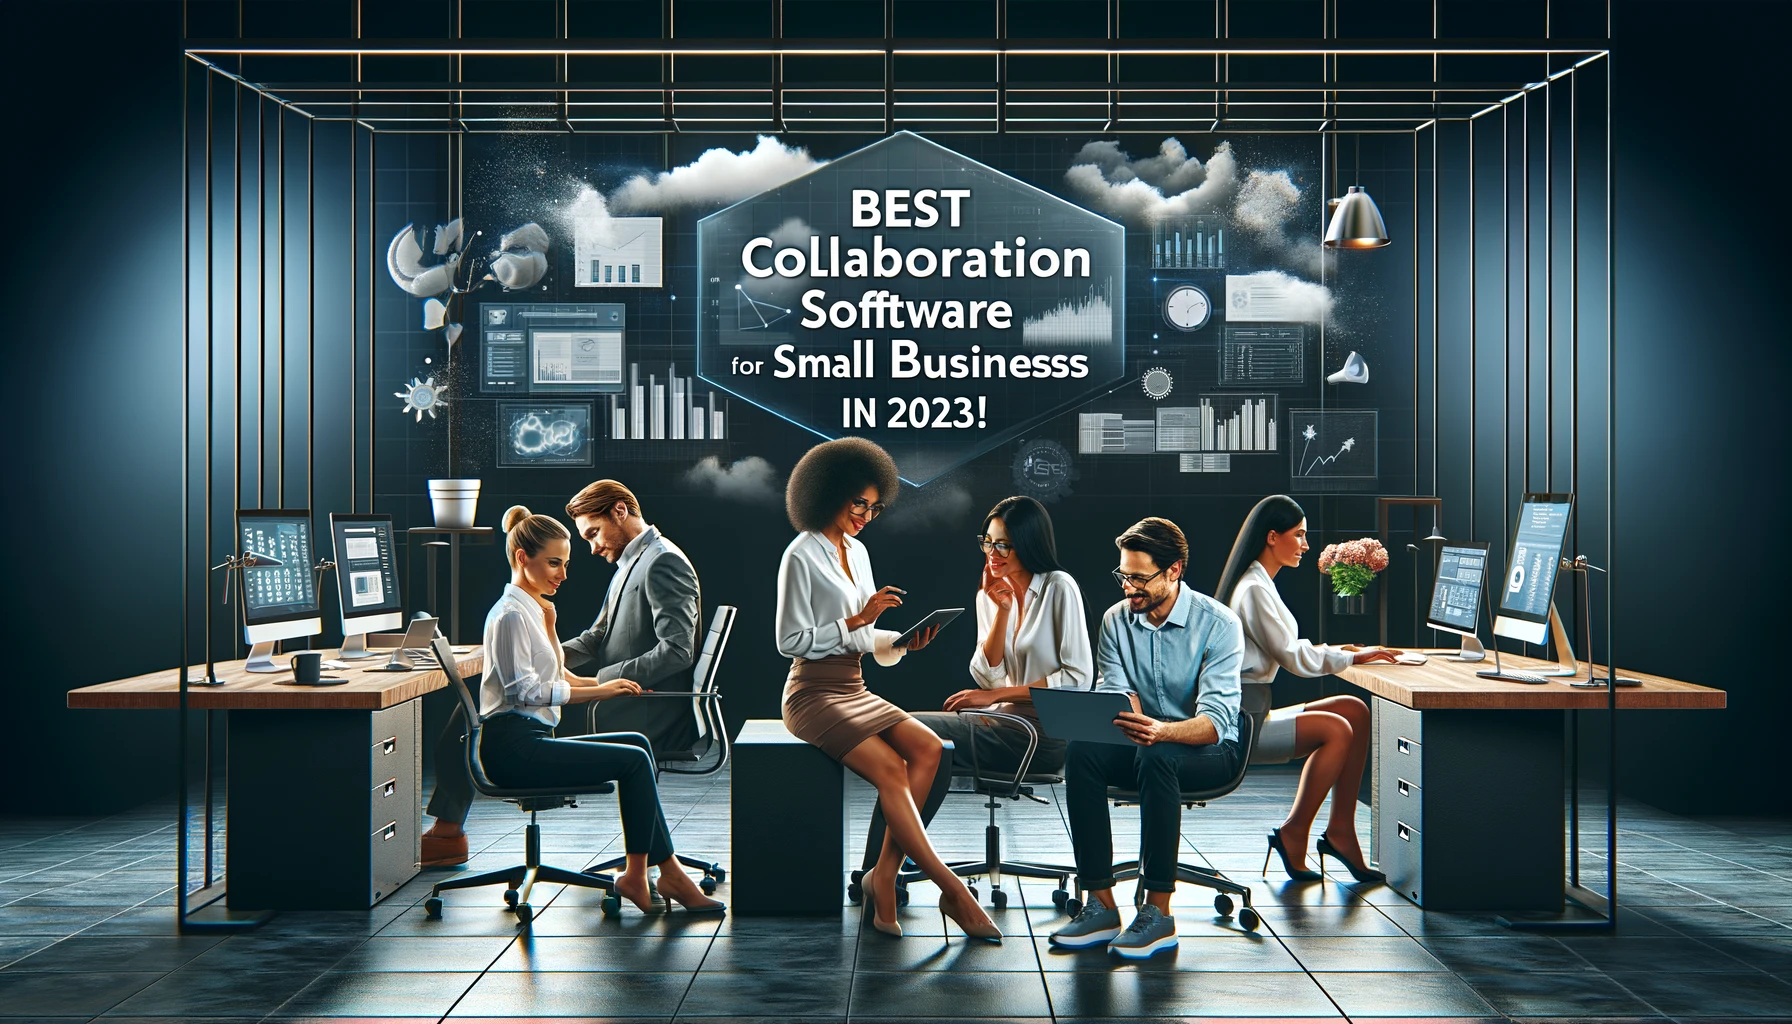 Best Collaboration Software for Small Business